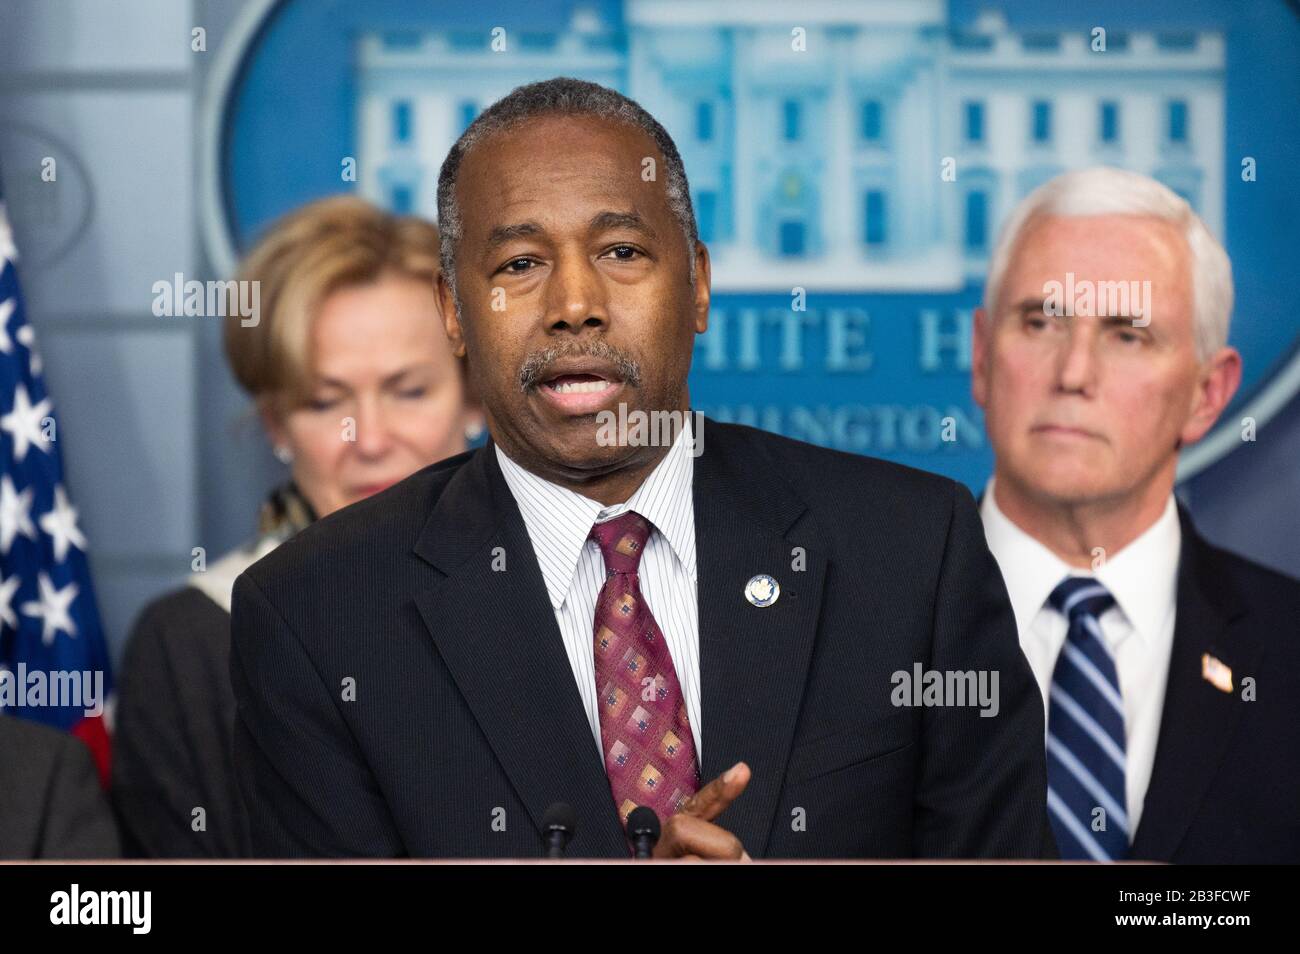 Washington, United States. 04th Mar, 2020. Dr. Ben Carson, United States Secretary of Housing and Urban Development, speaking at the Coronavirus Task Force press conference. Credit: SOPA Images Limited/Alamy Live News Stock Photo